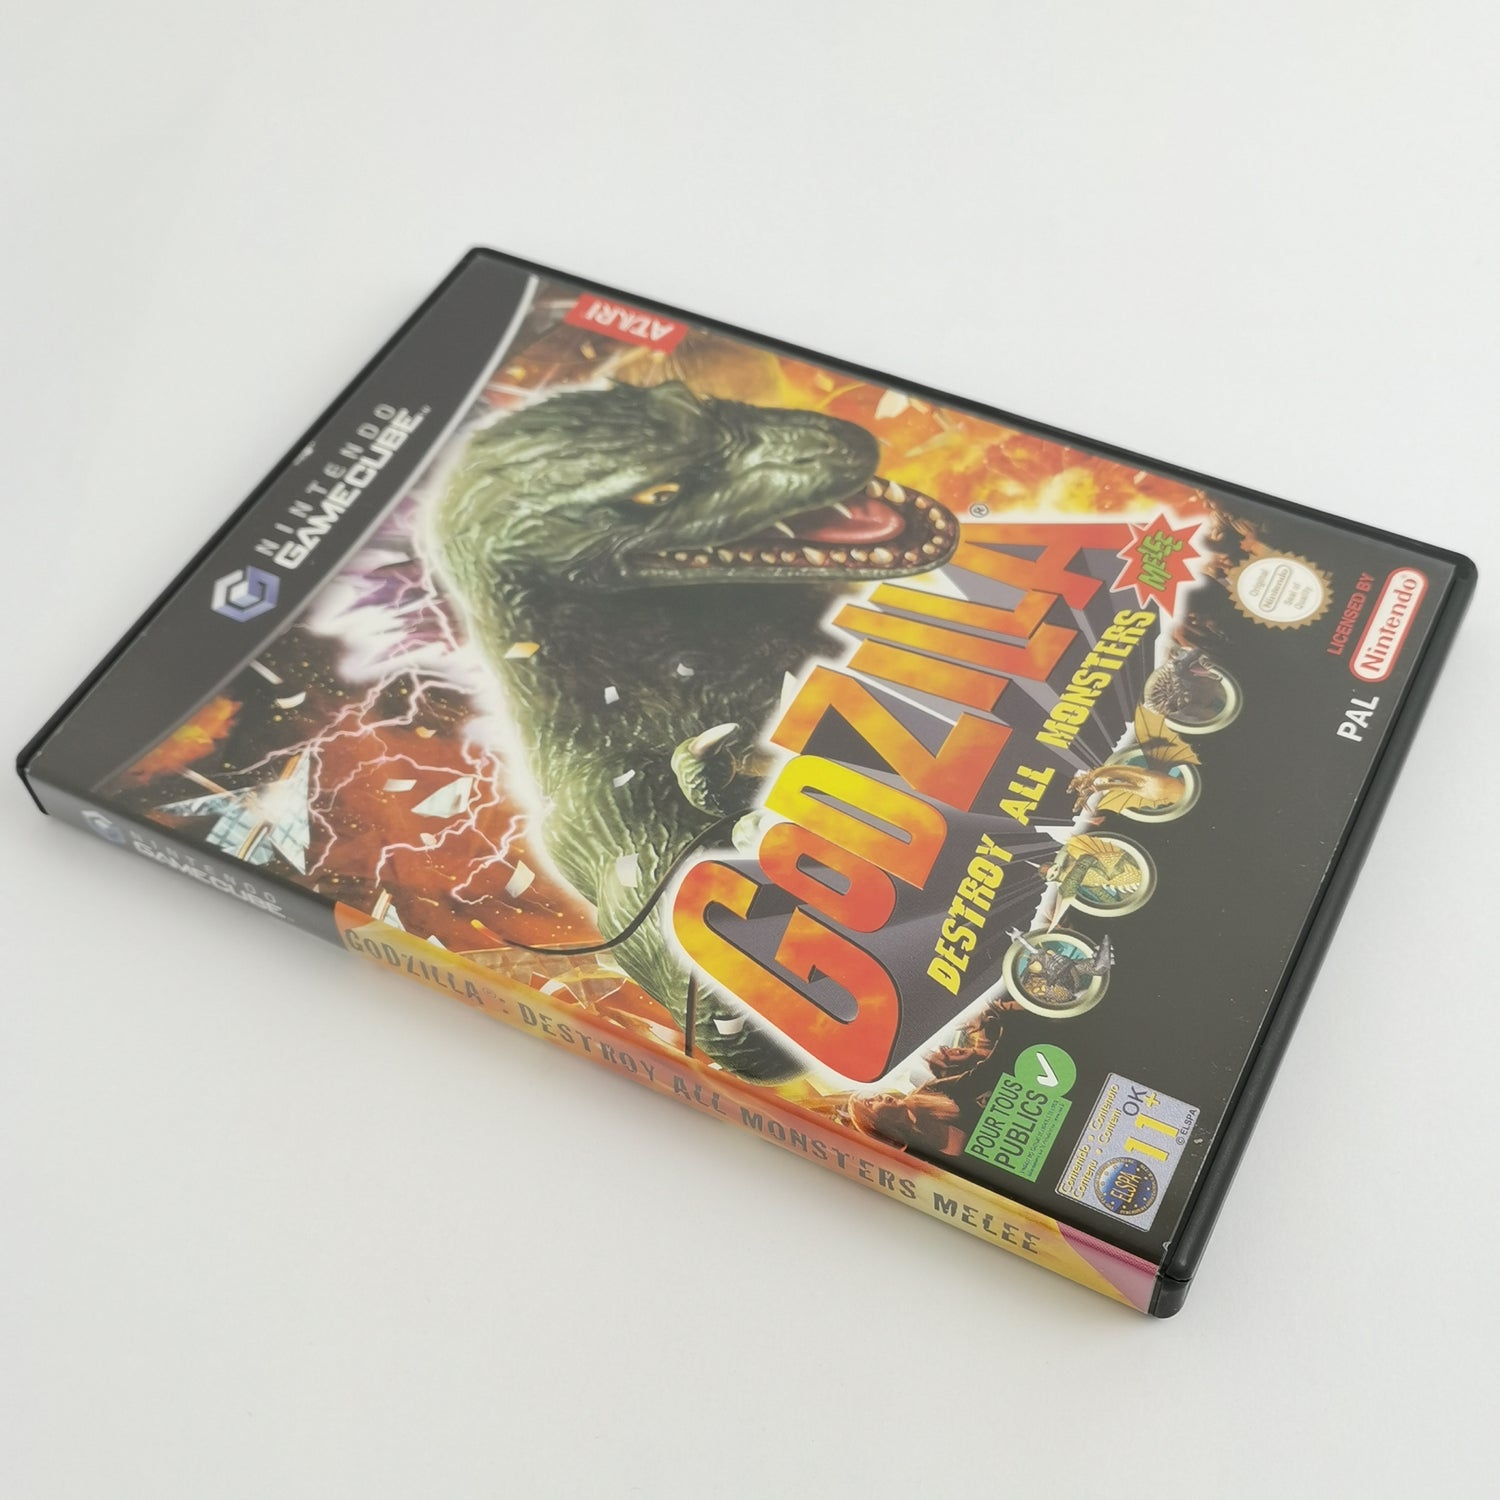 Nintendo Gamecube Game: Godzilla Destroy All Monsters Melee | OVP - PAL